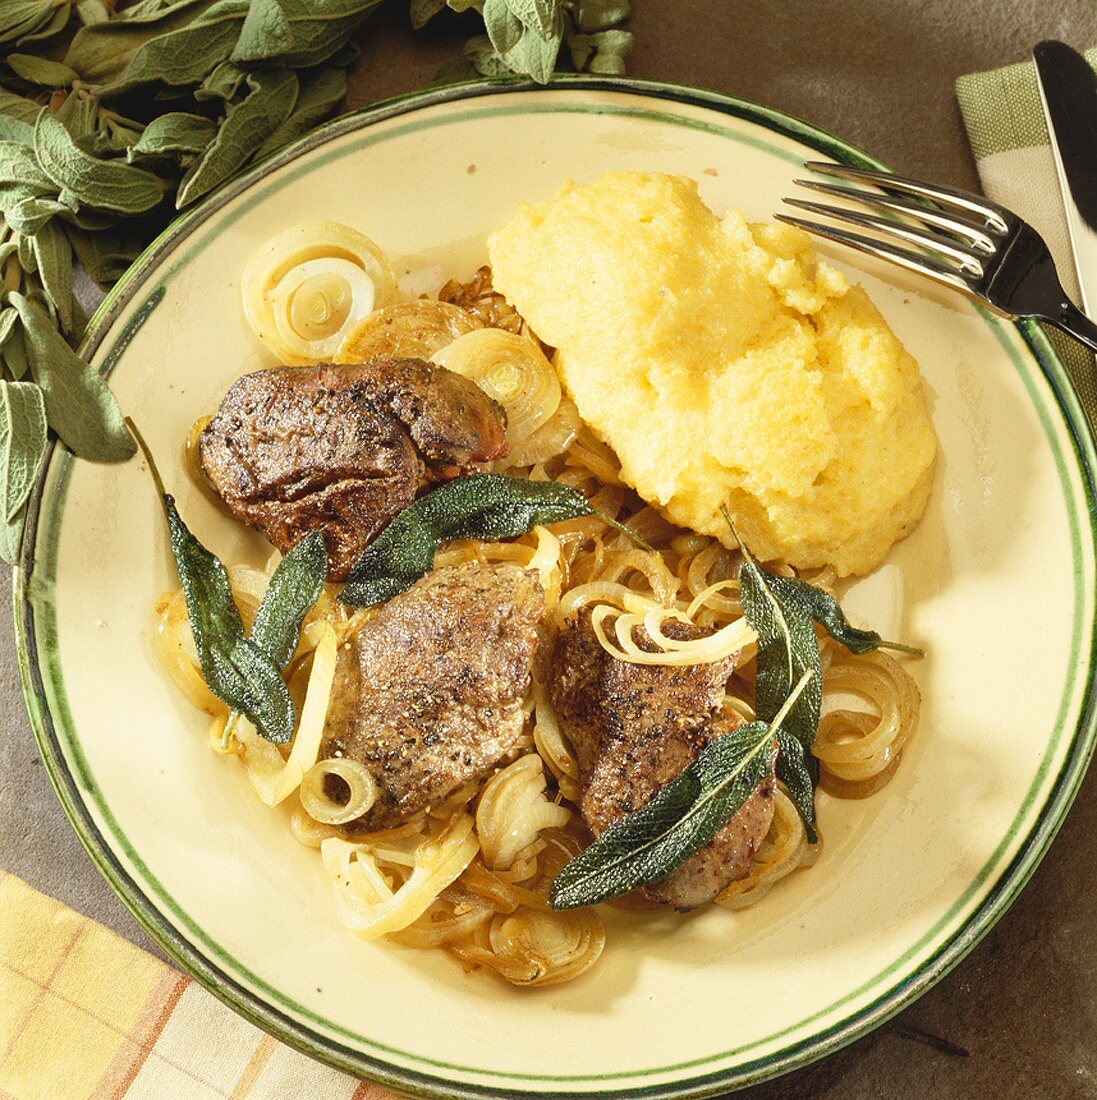 Fried liver with sage, onions and mashed potato